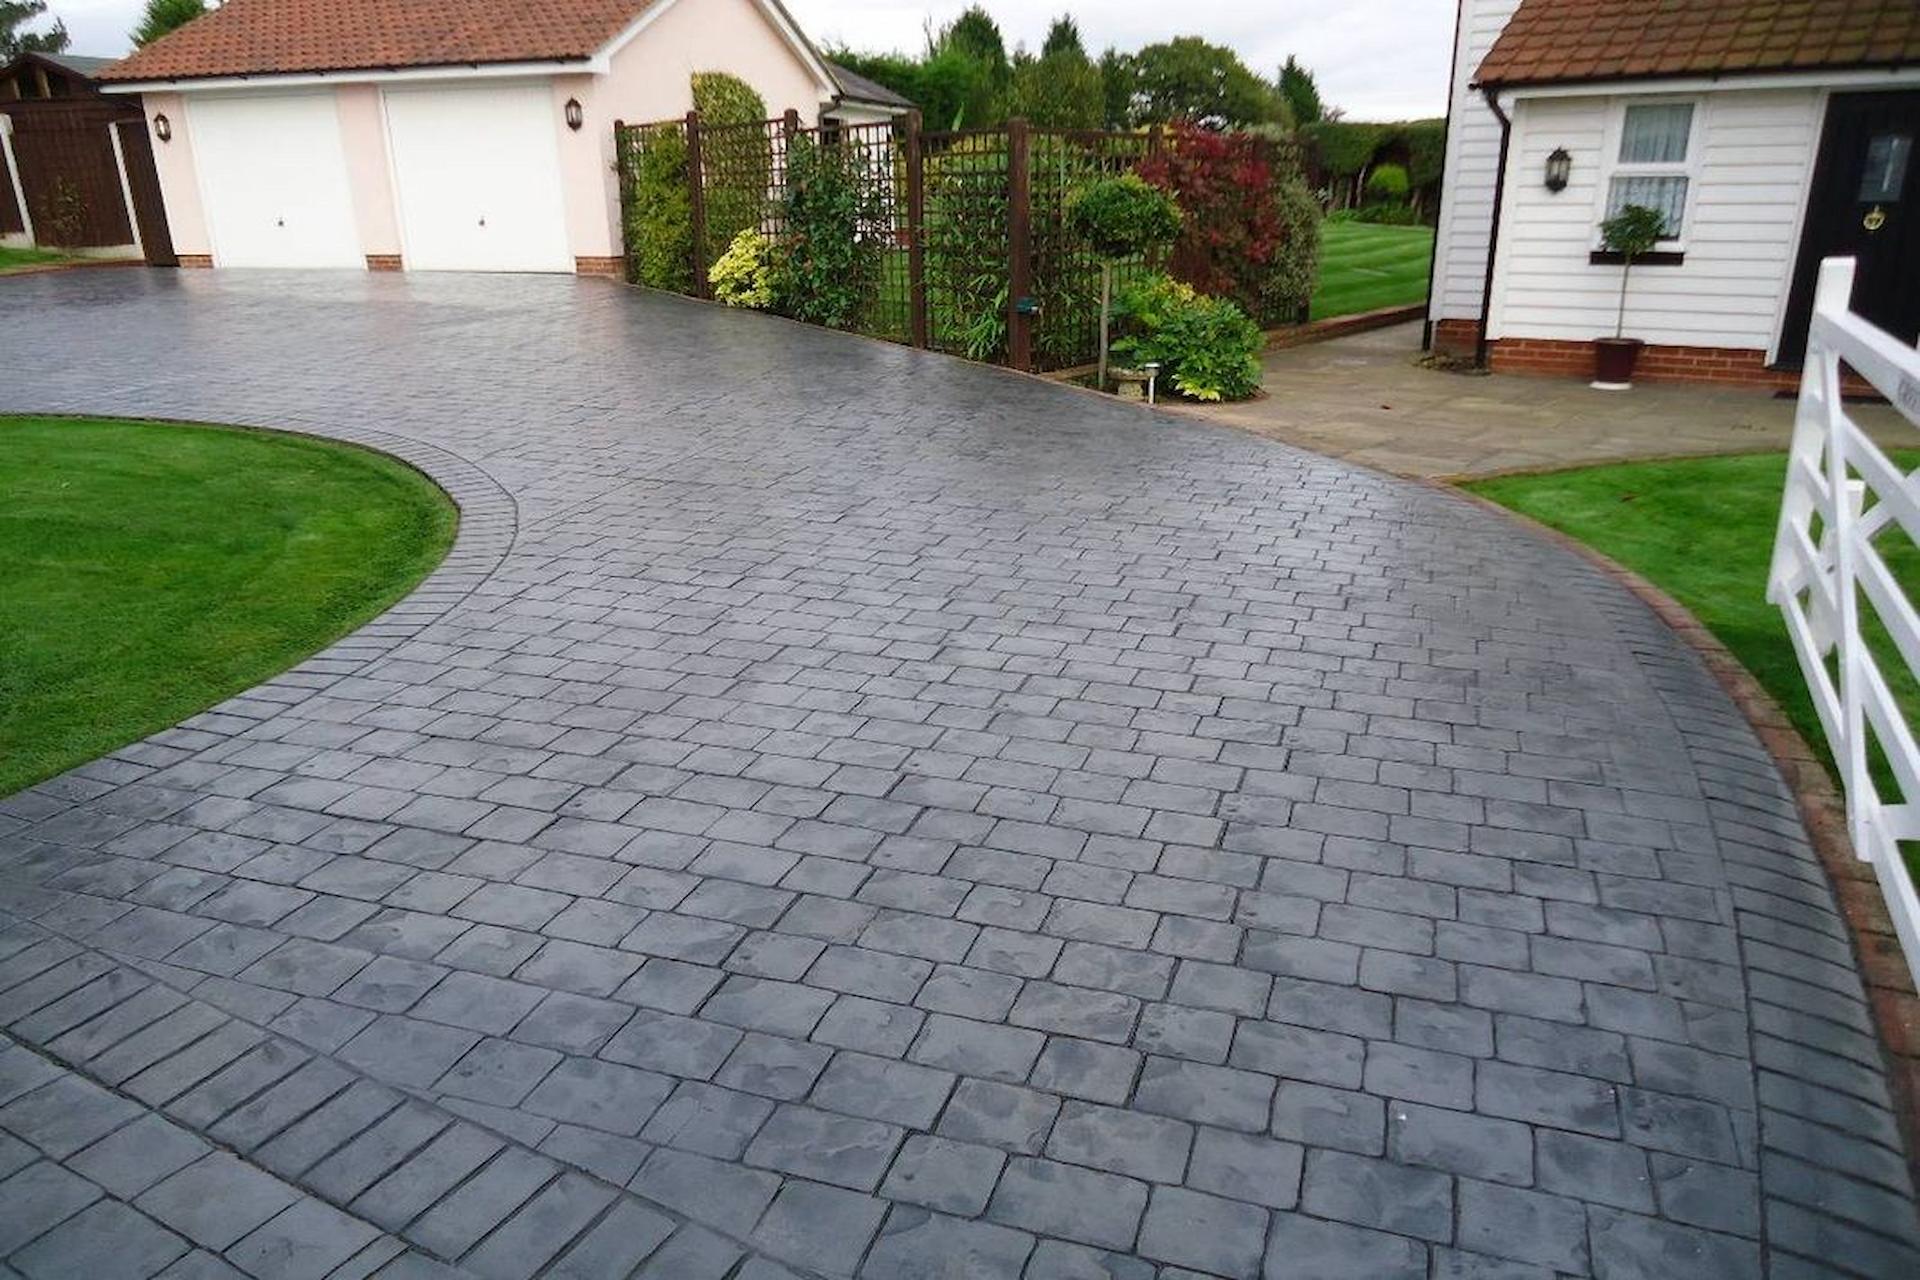 Why Should You Hire Professional Driveway Installers?